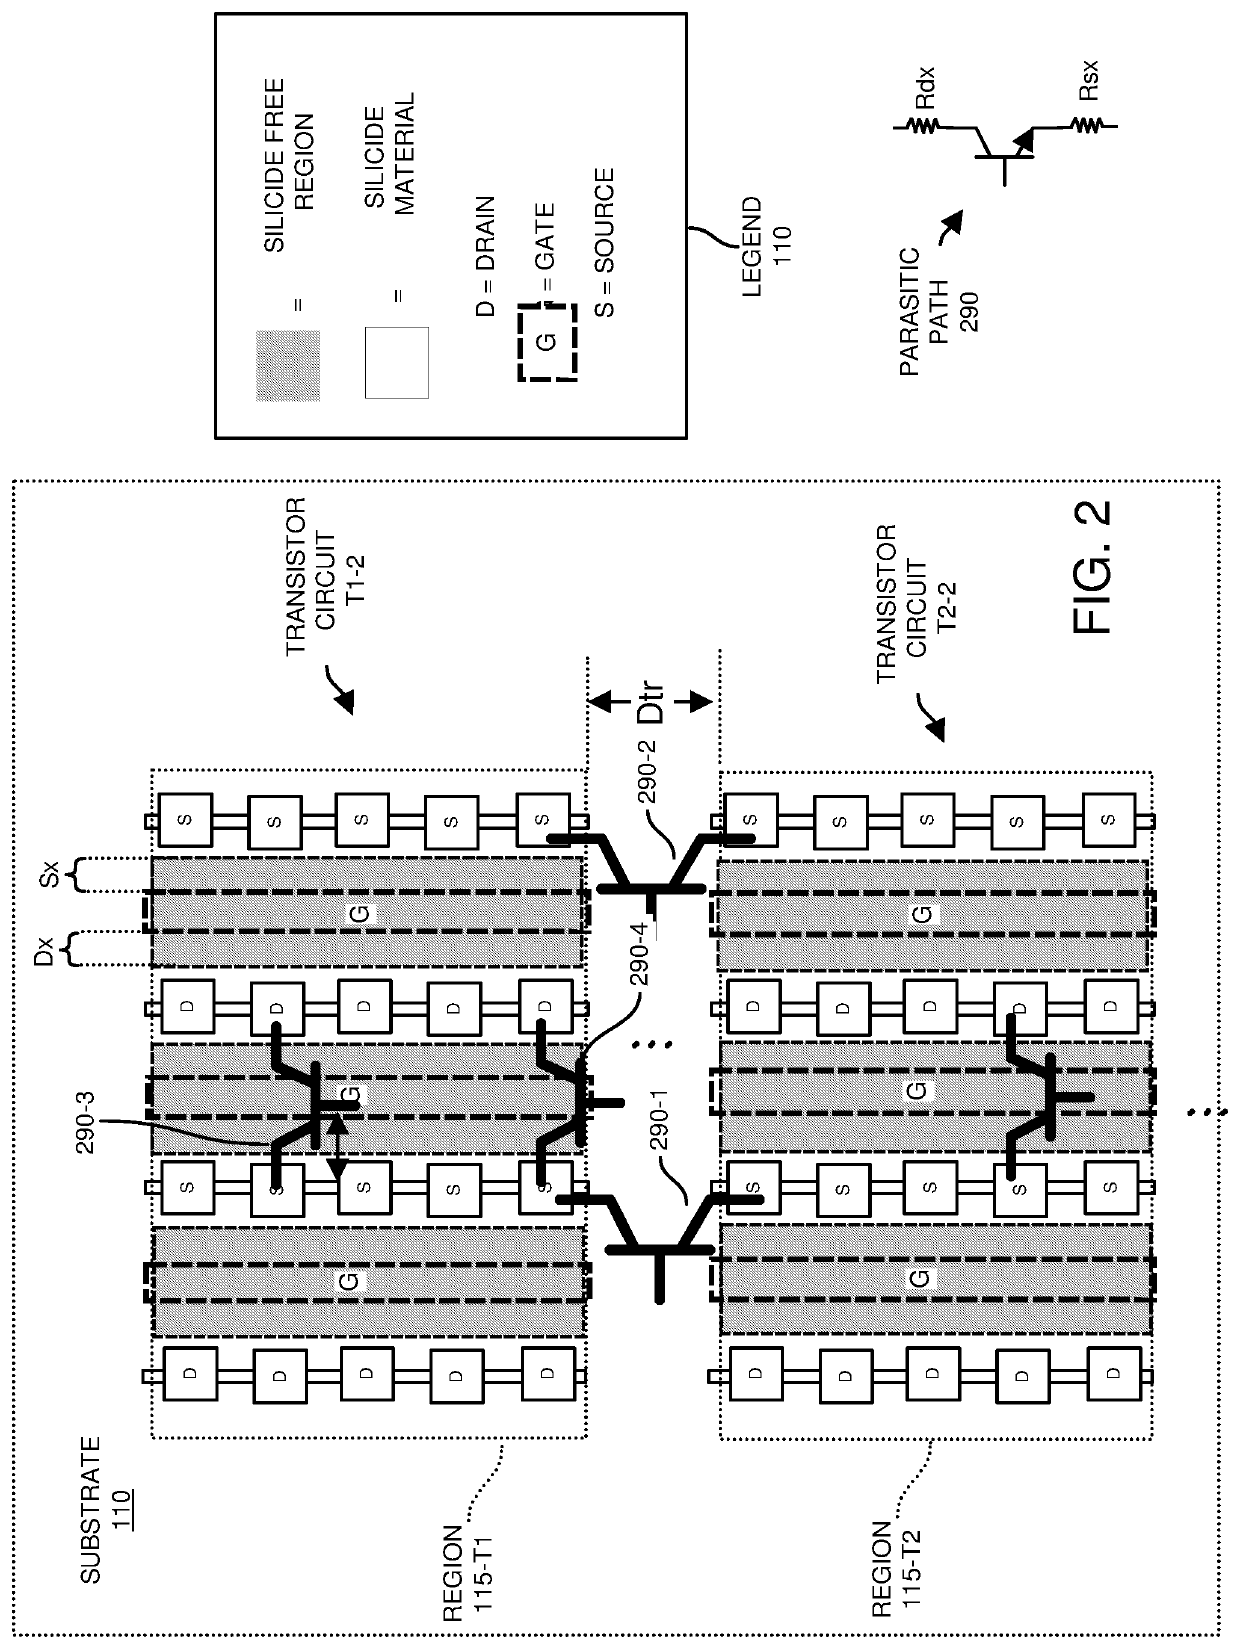 ESD protection in an electronic device